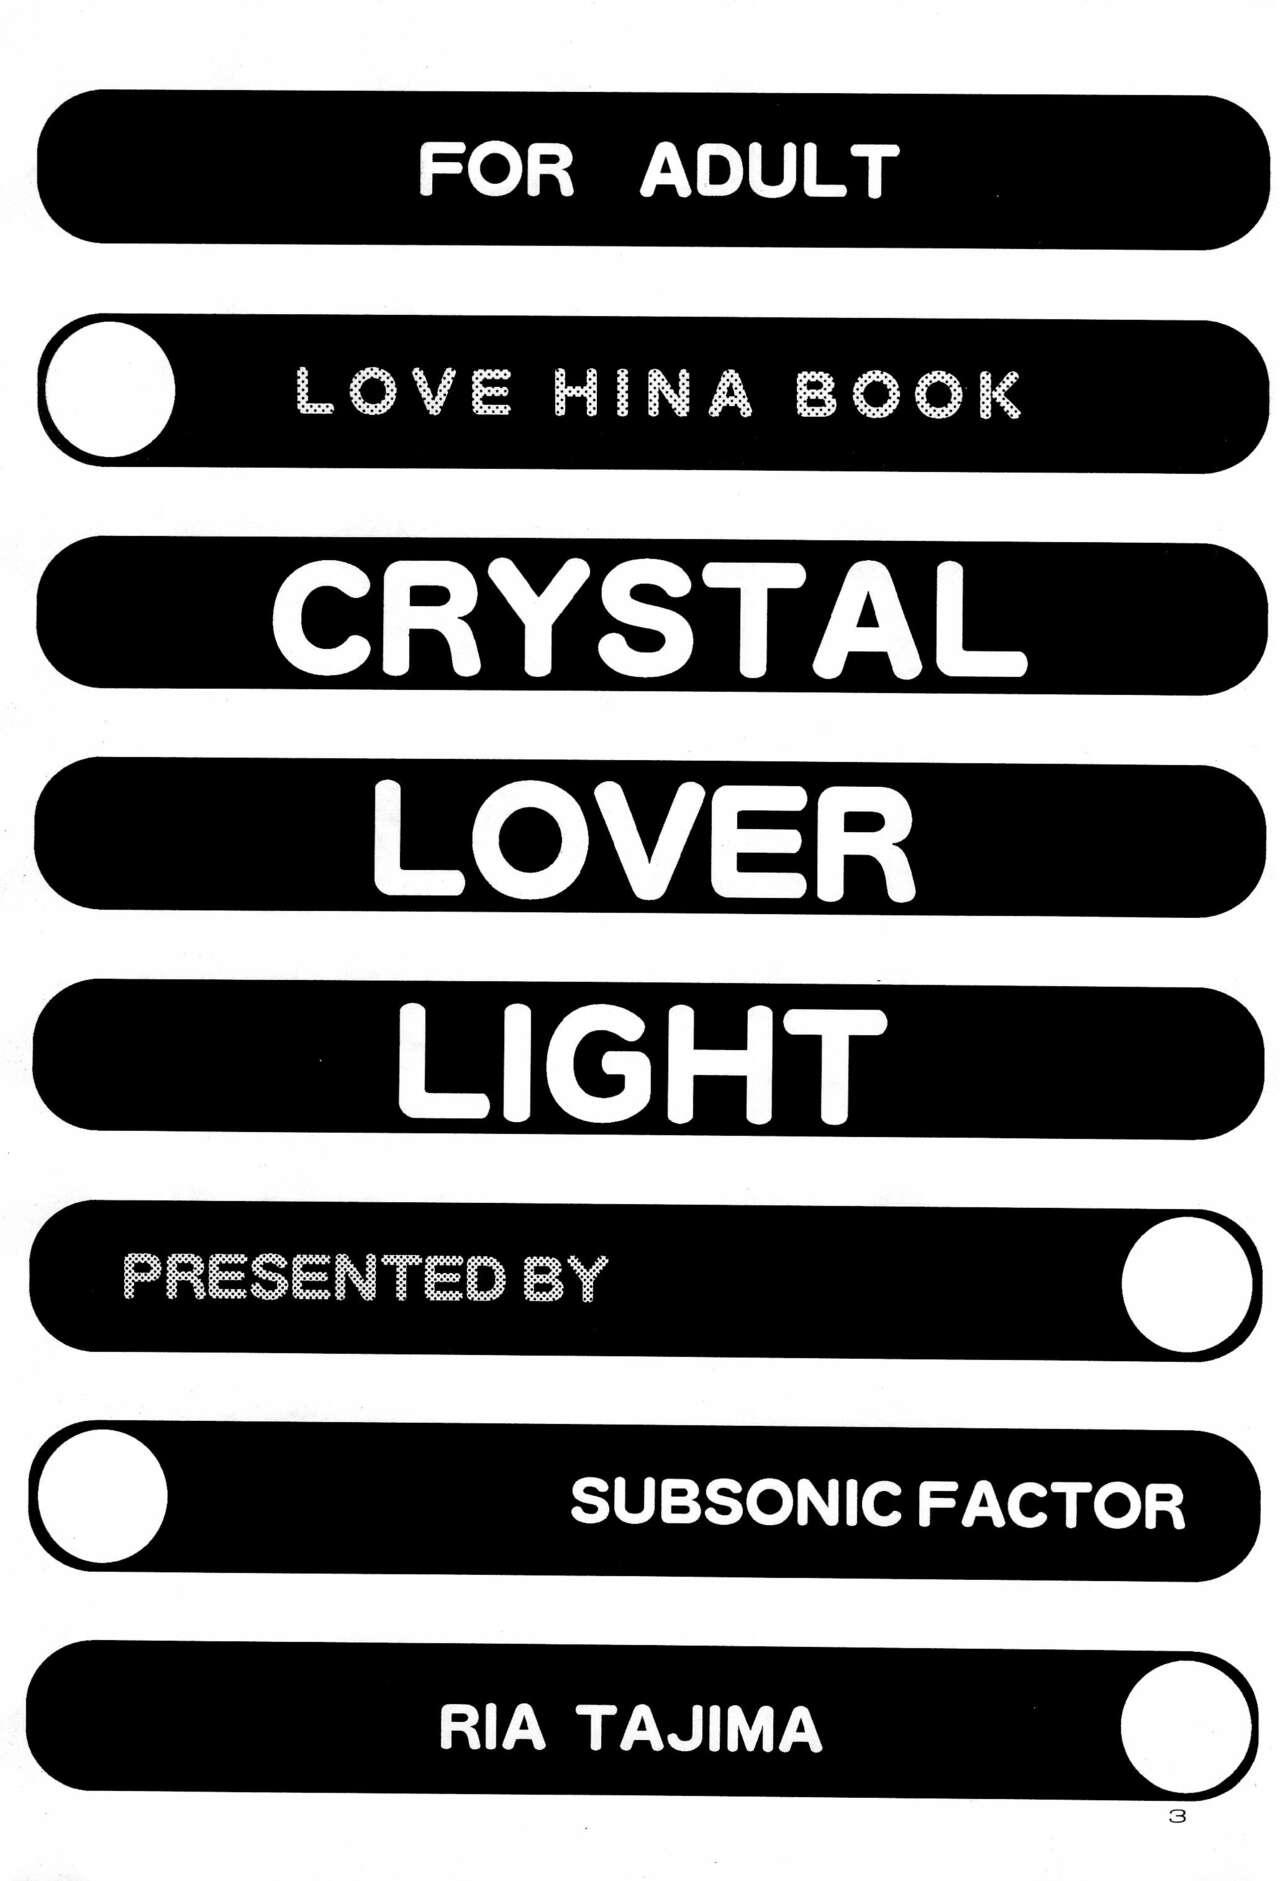 Indian Sex CRYSTAL LOVER LIGHT - Love hina Nerd - Page 3